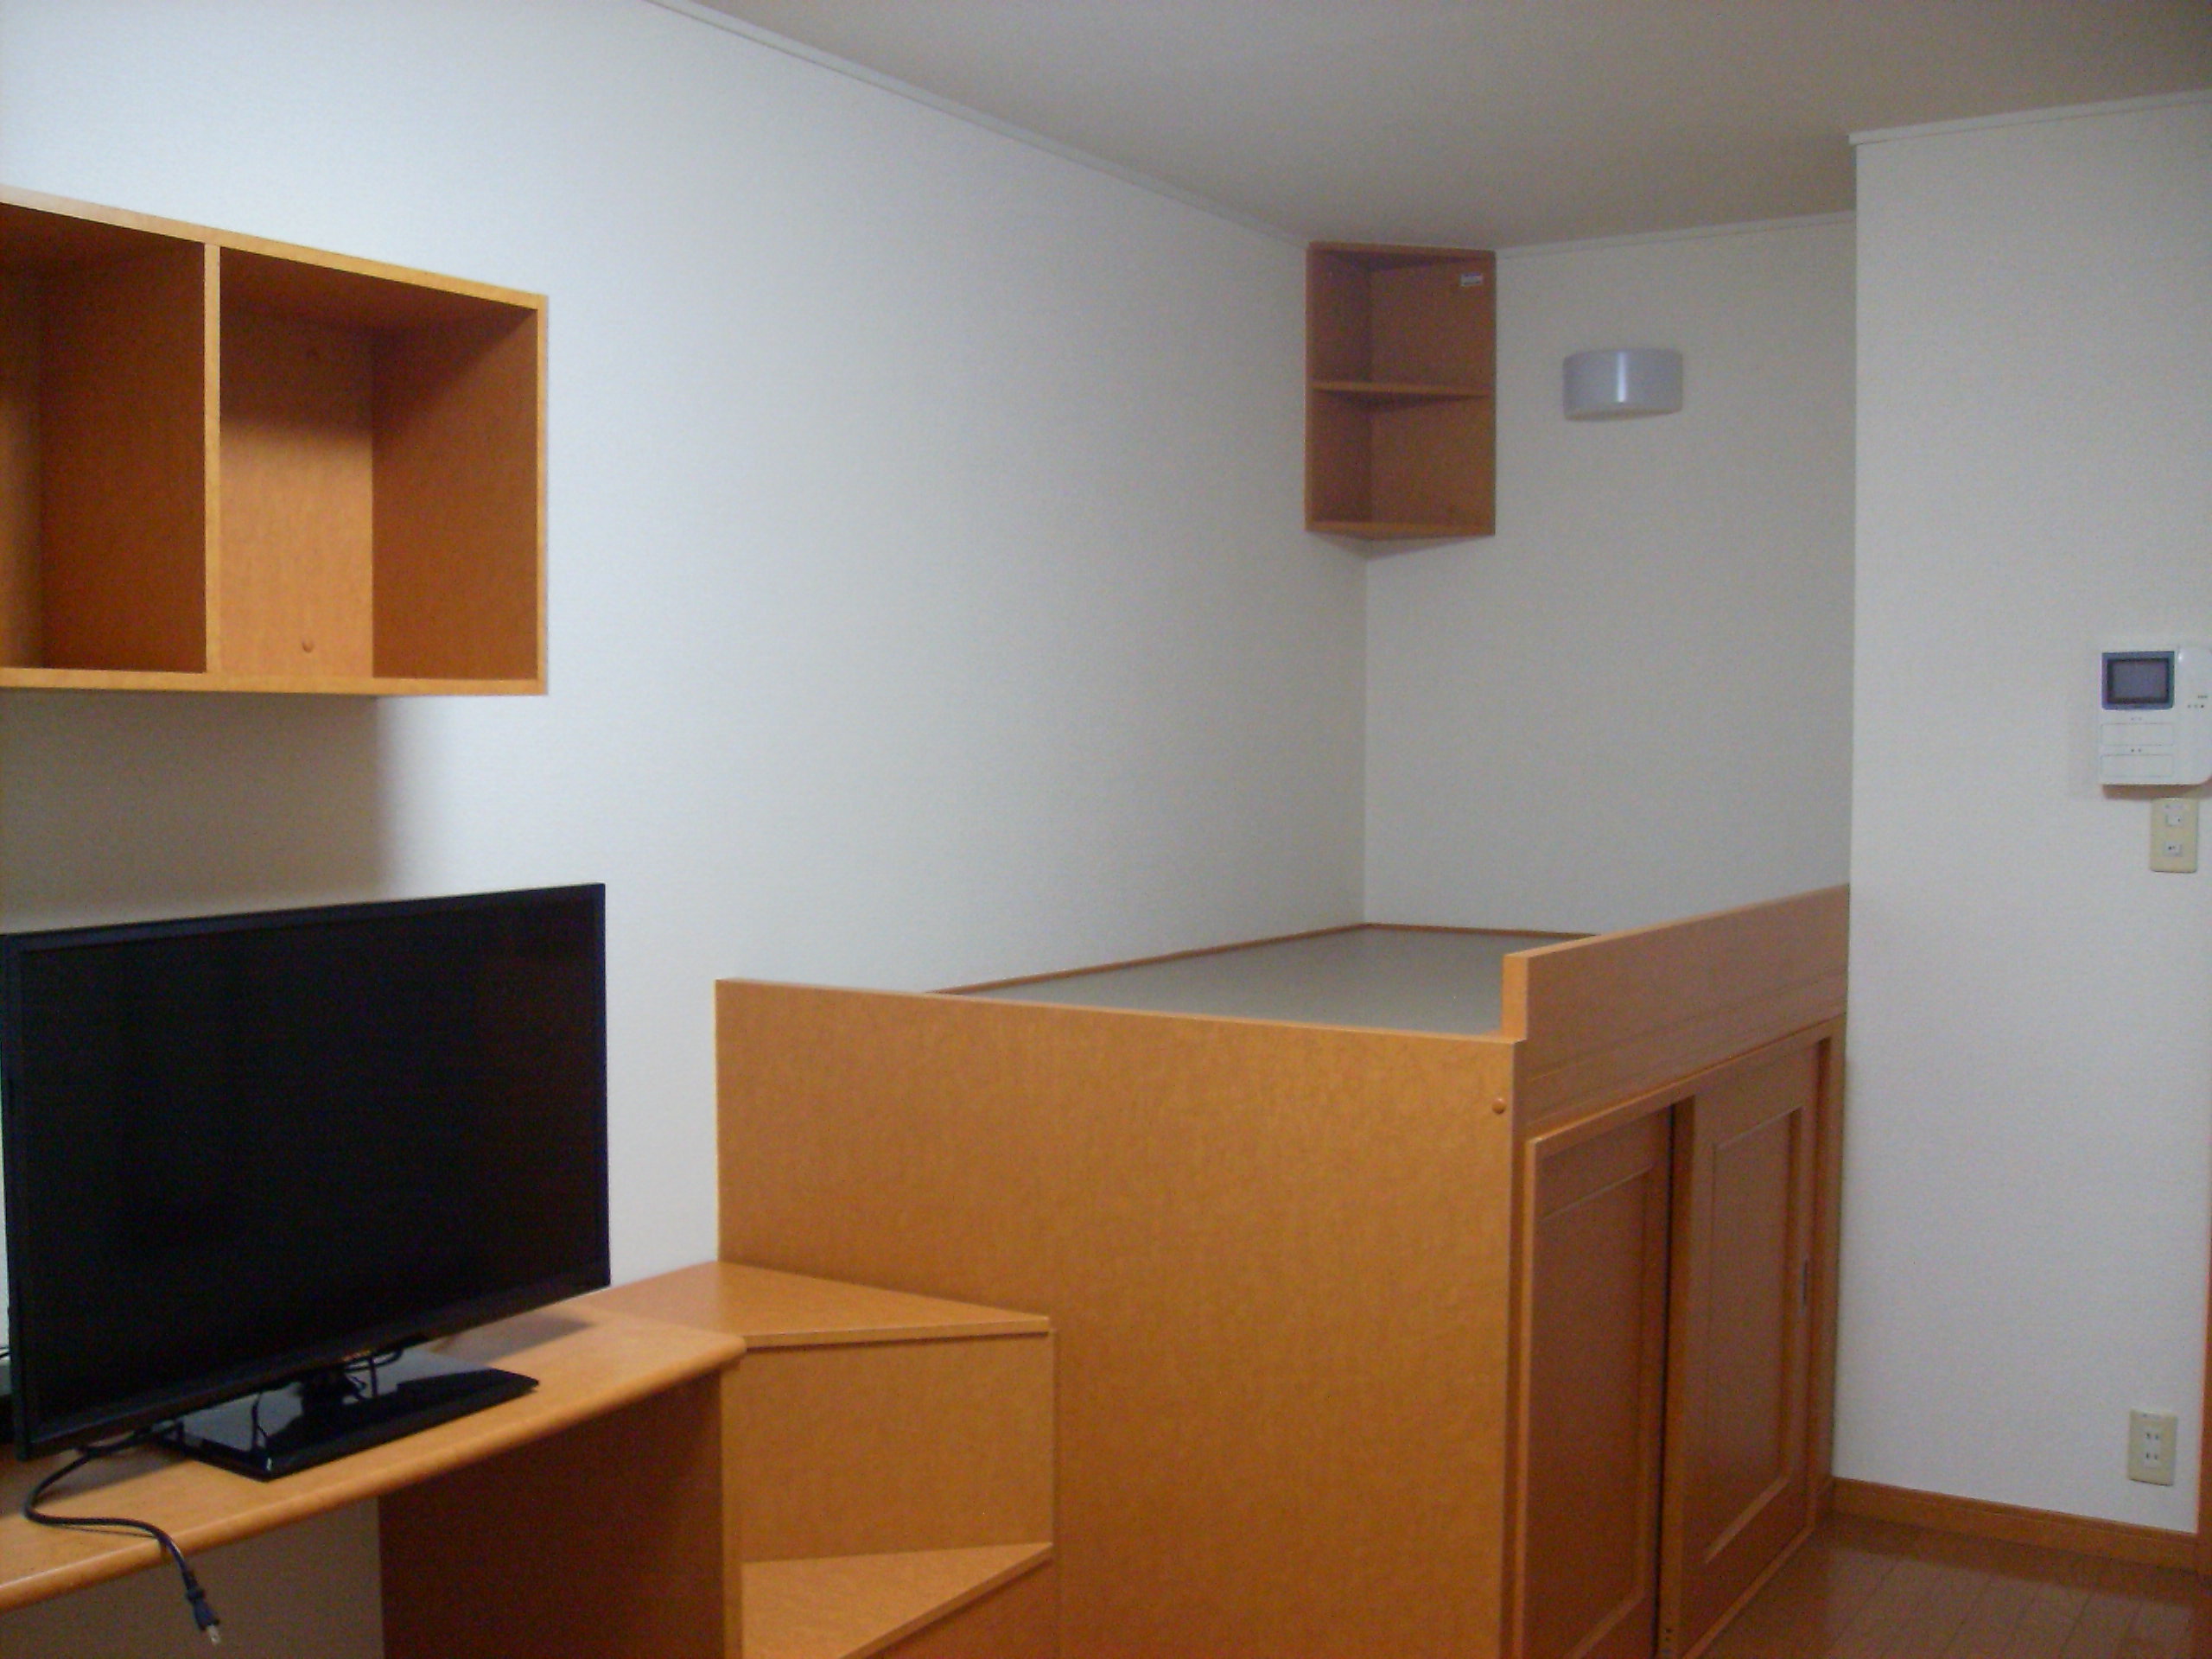 Living and room. Storage is a common type of room!